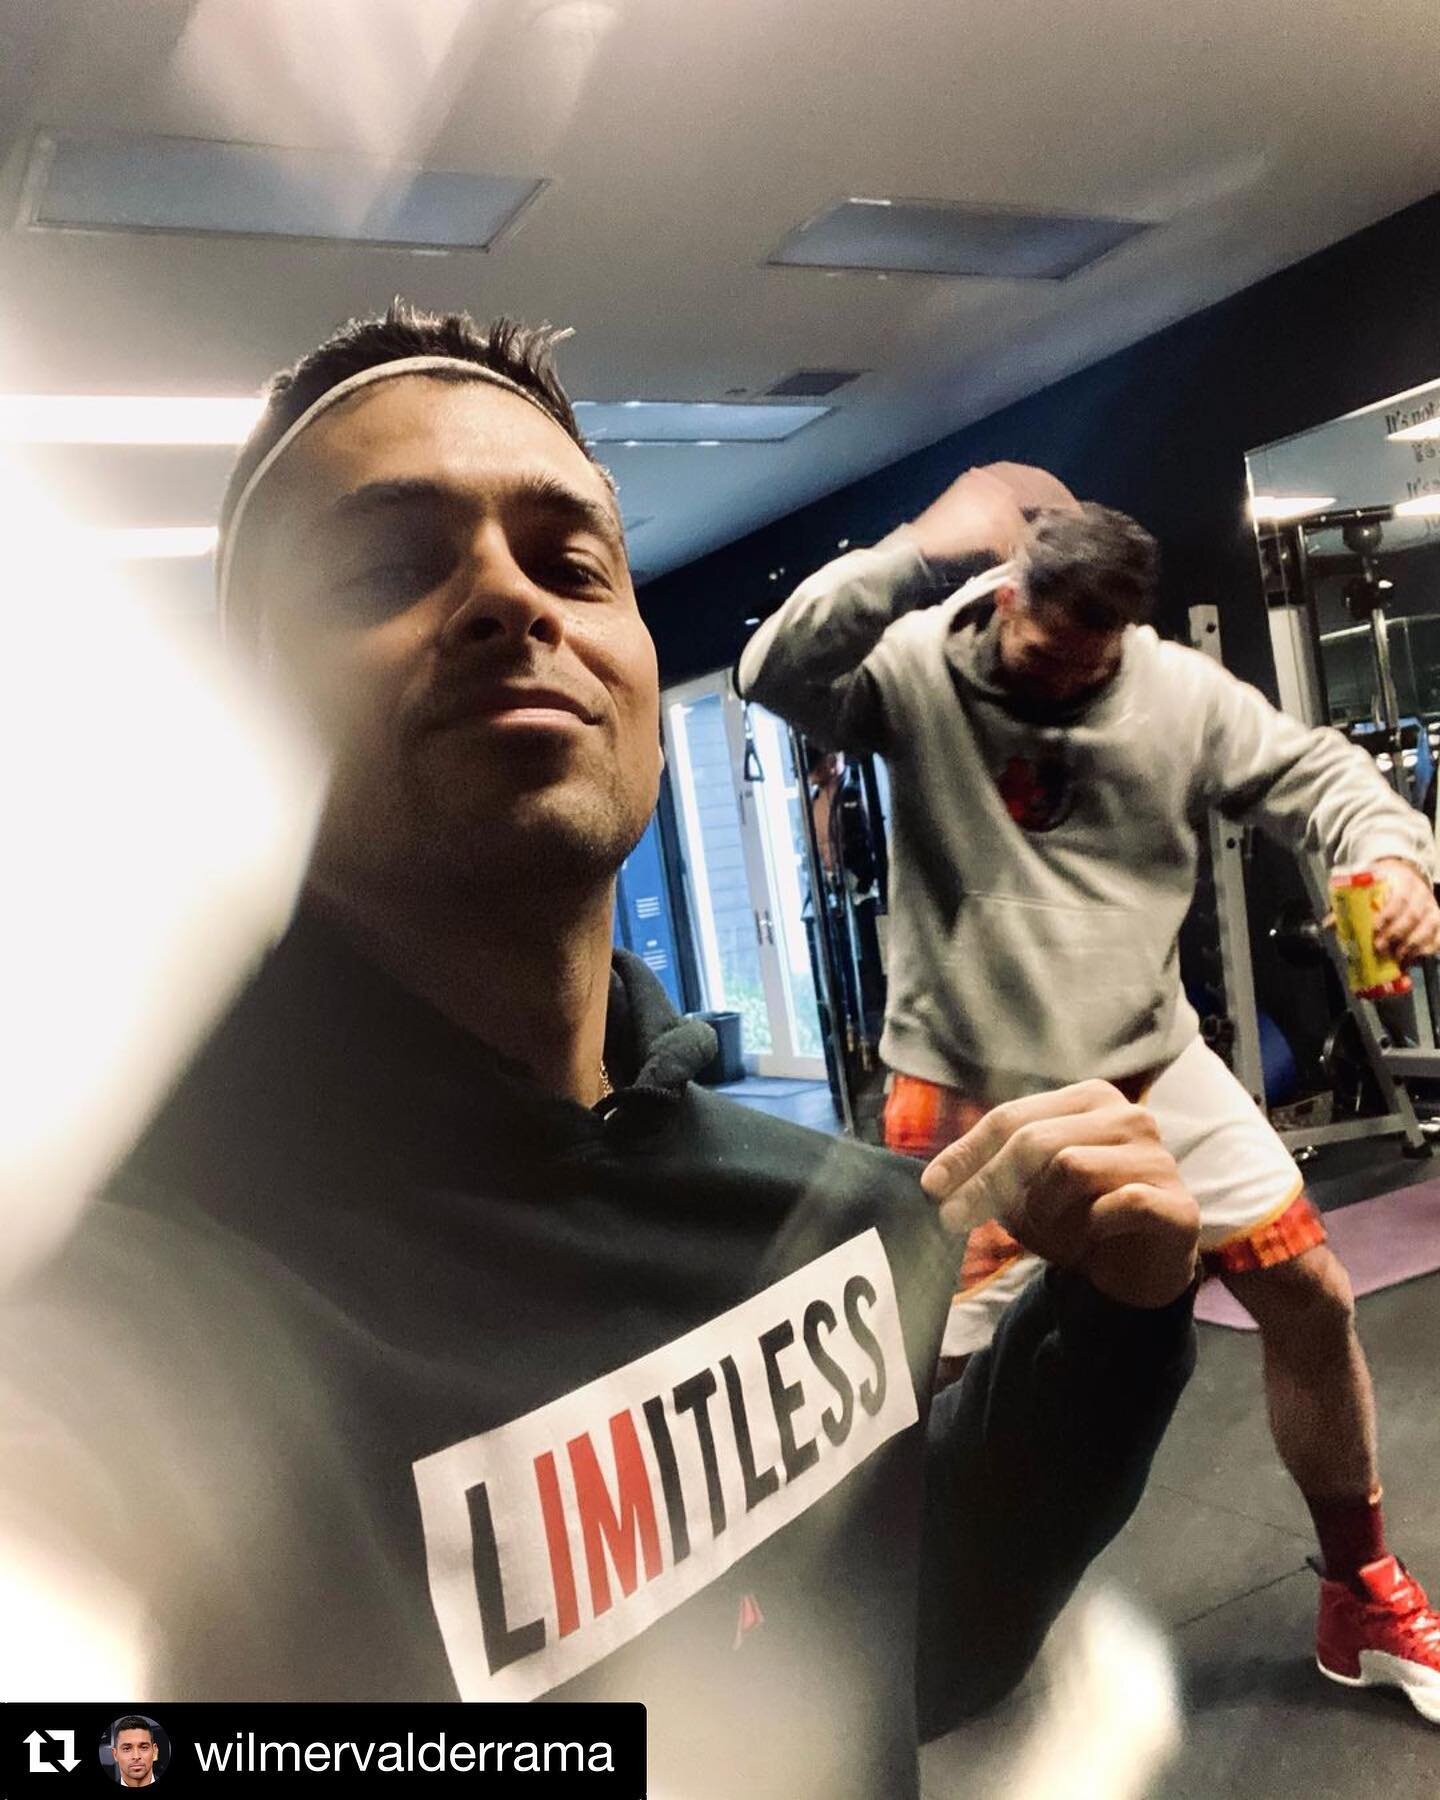 #Repost @wilmervalderrama
・・・
#MyHourADay working out all the worries,  seeing the world for what it can be.. and keeping our heads up in honor of those we love and the ones who wait for us on the other side. #EasierToLoveThanToNot